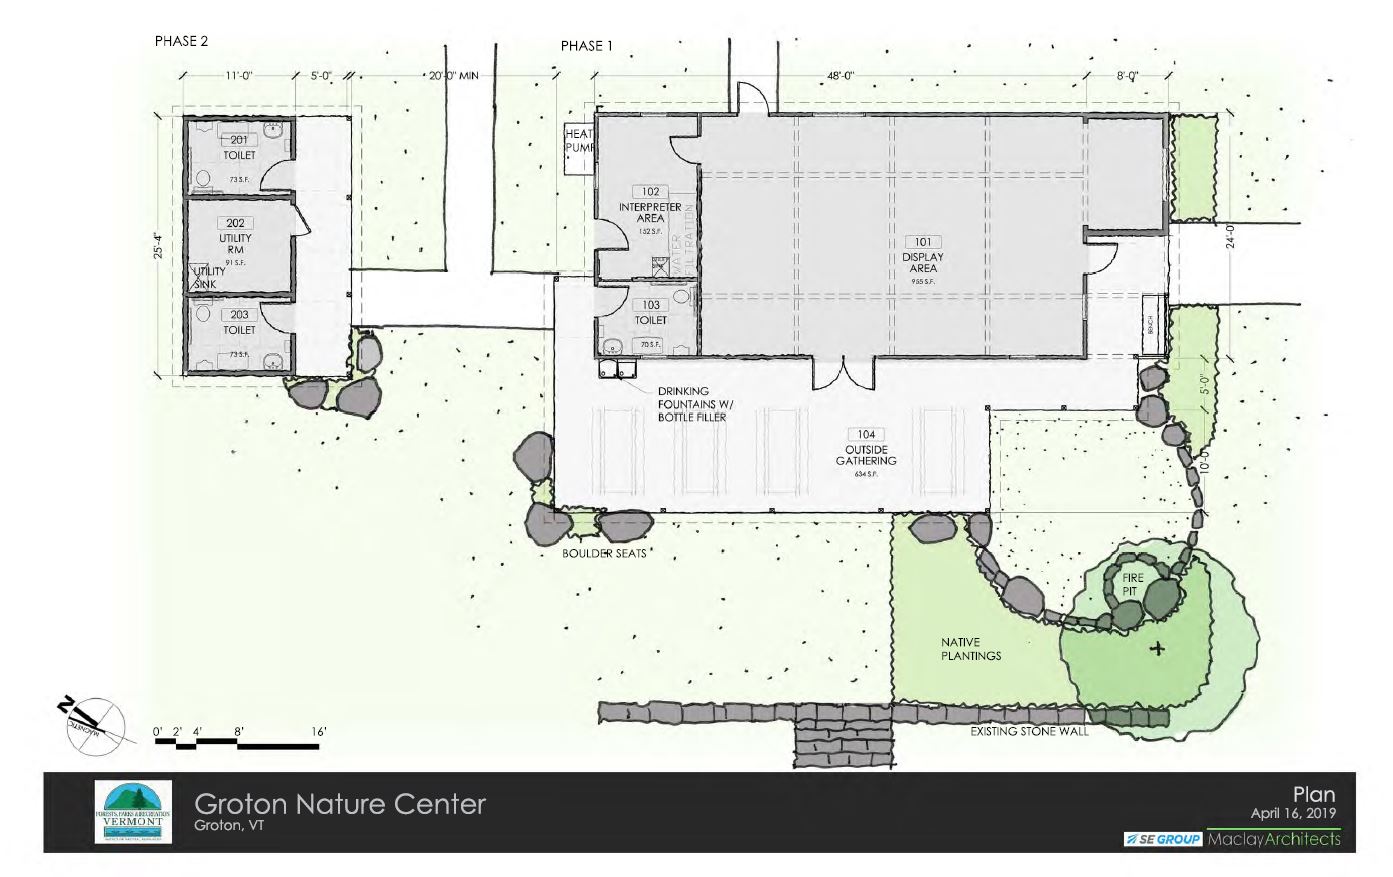 Plans for Groton Nature Center